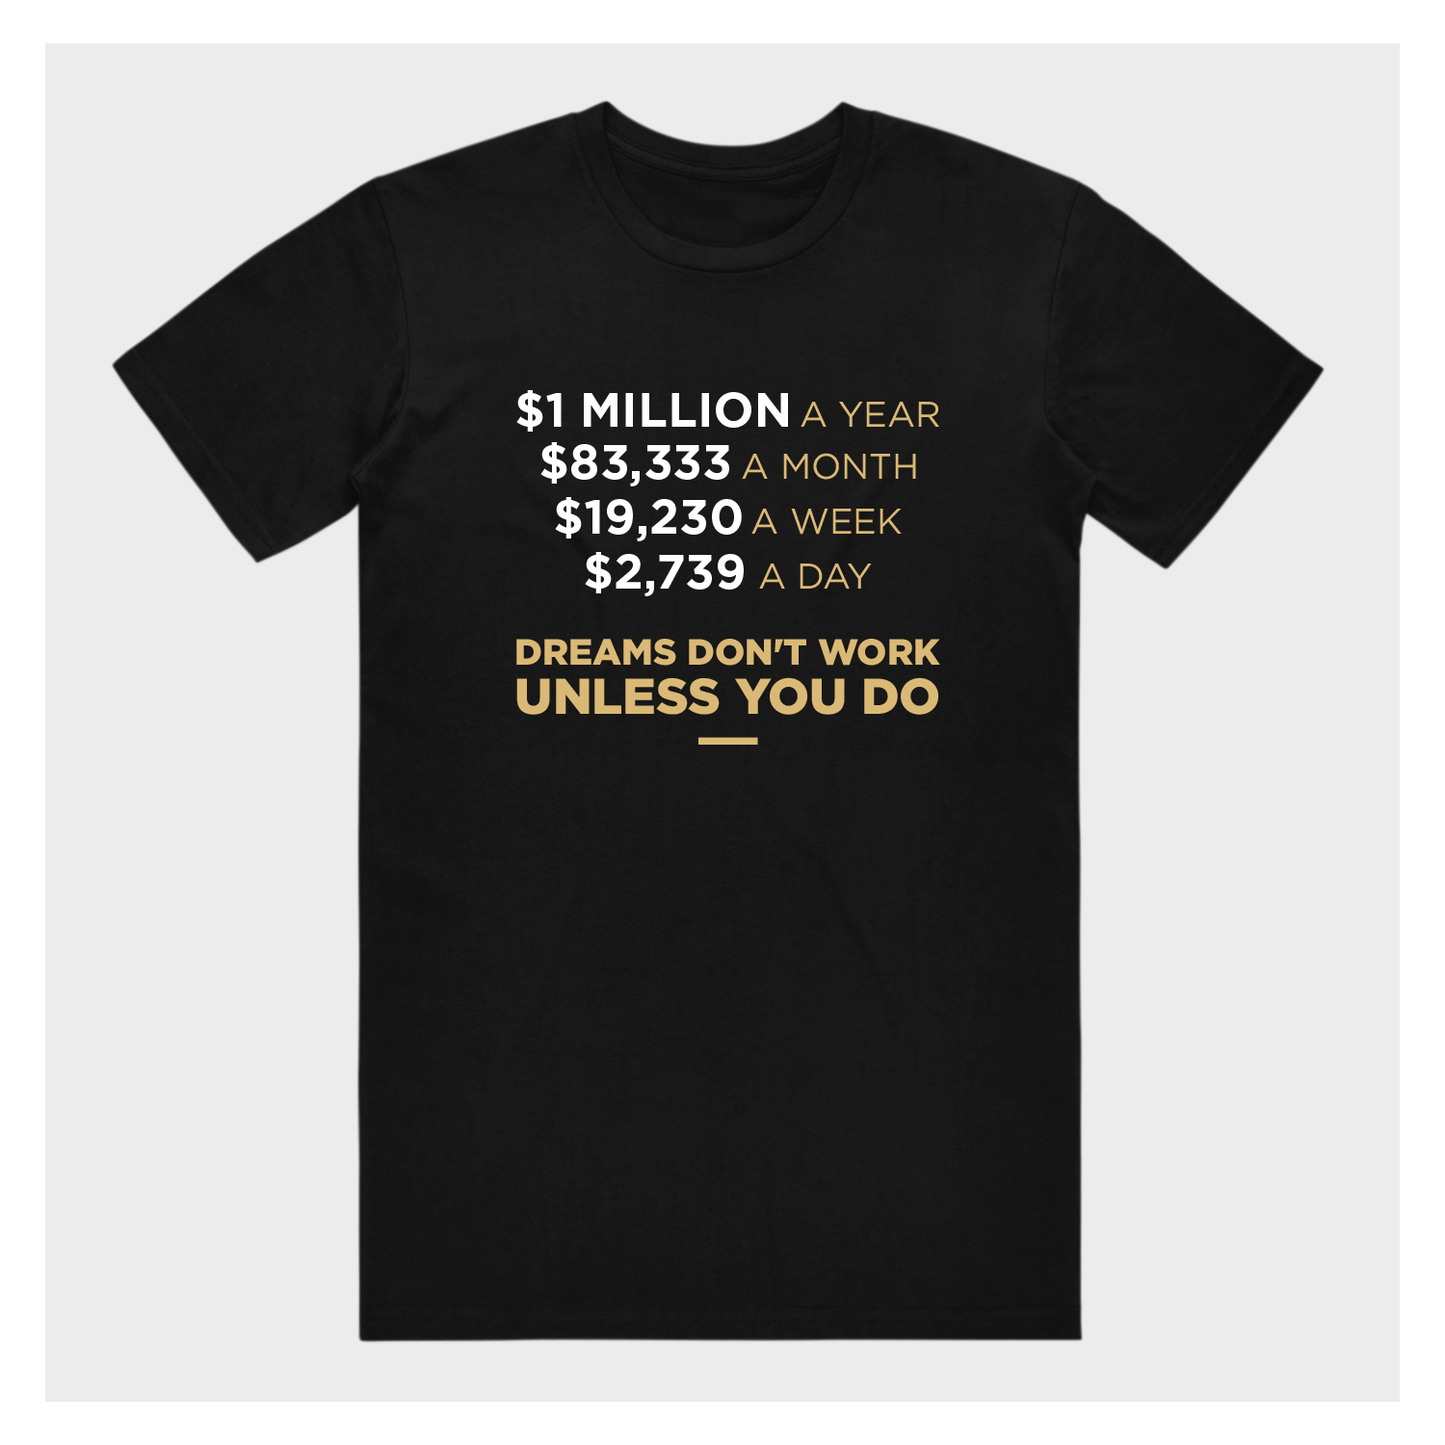 dreams don't work, Unless you do - T-shirt